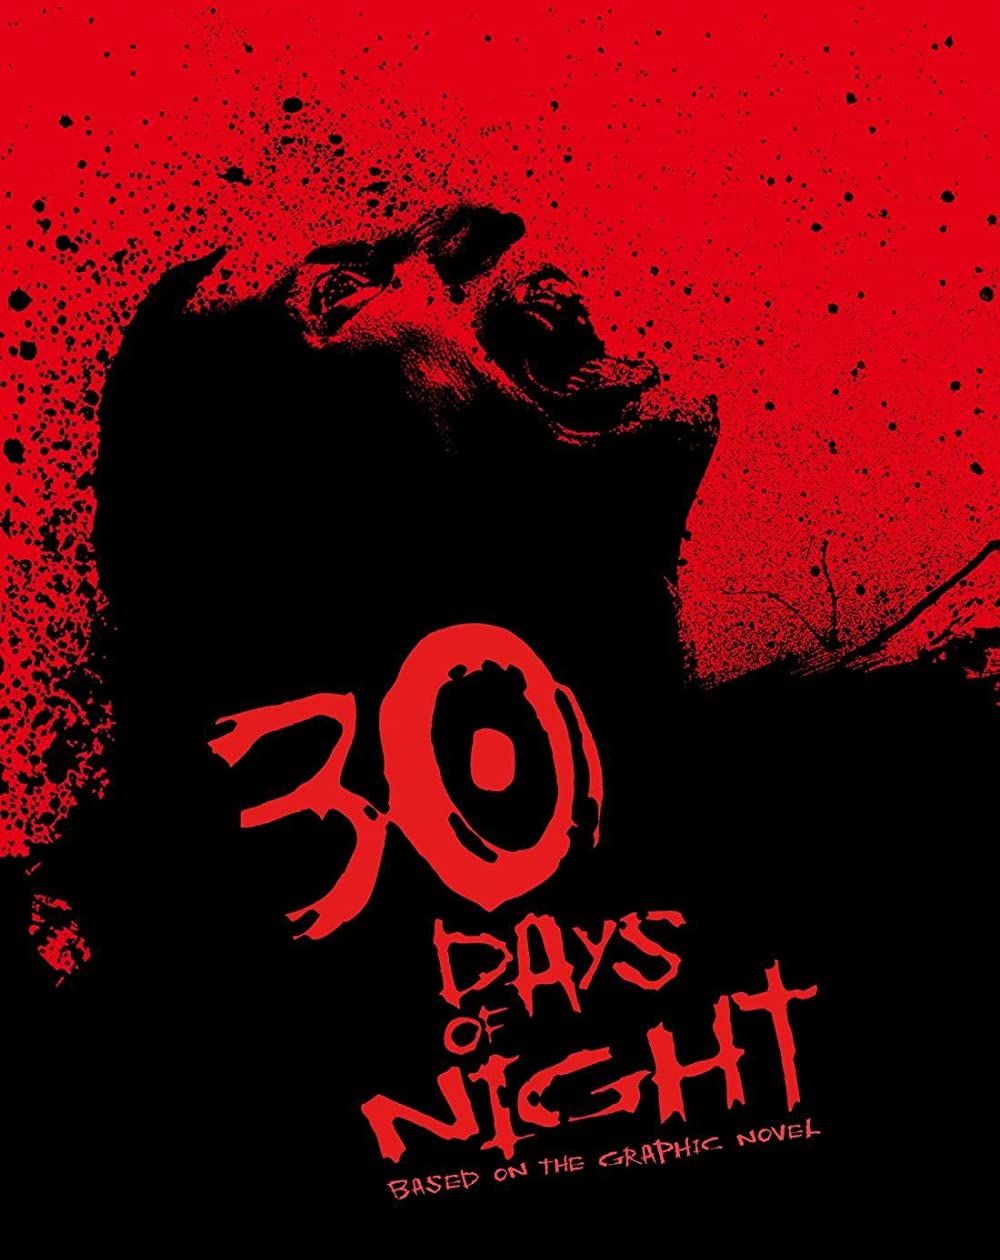 They're Coming! - 30 Days of Night (2007)